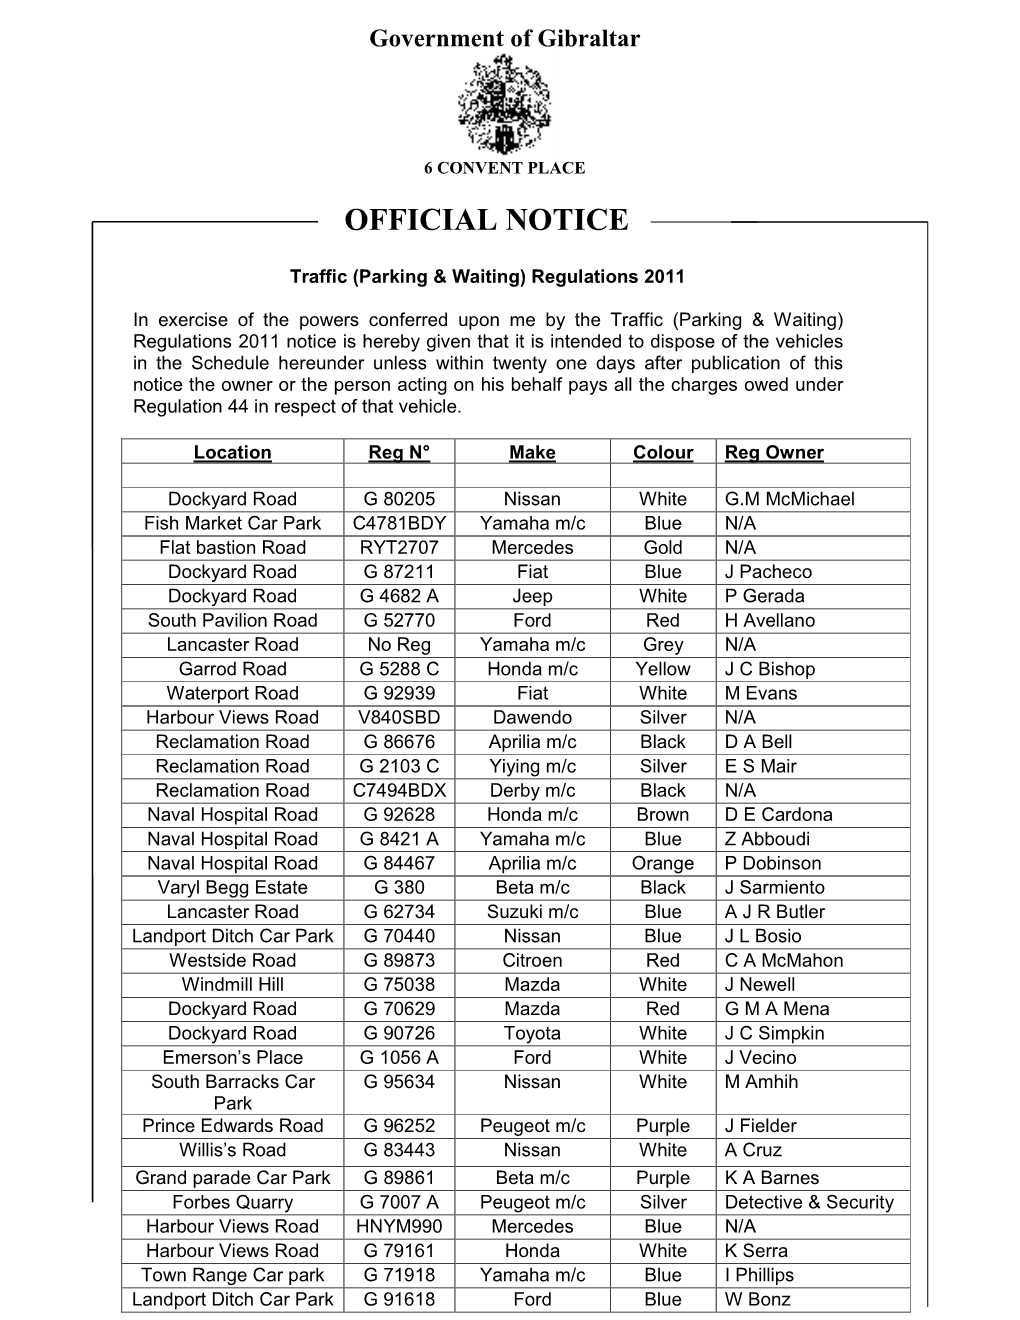 Official Notice